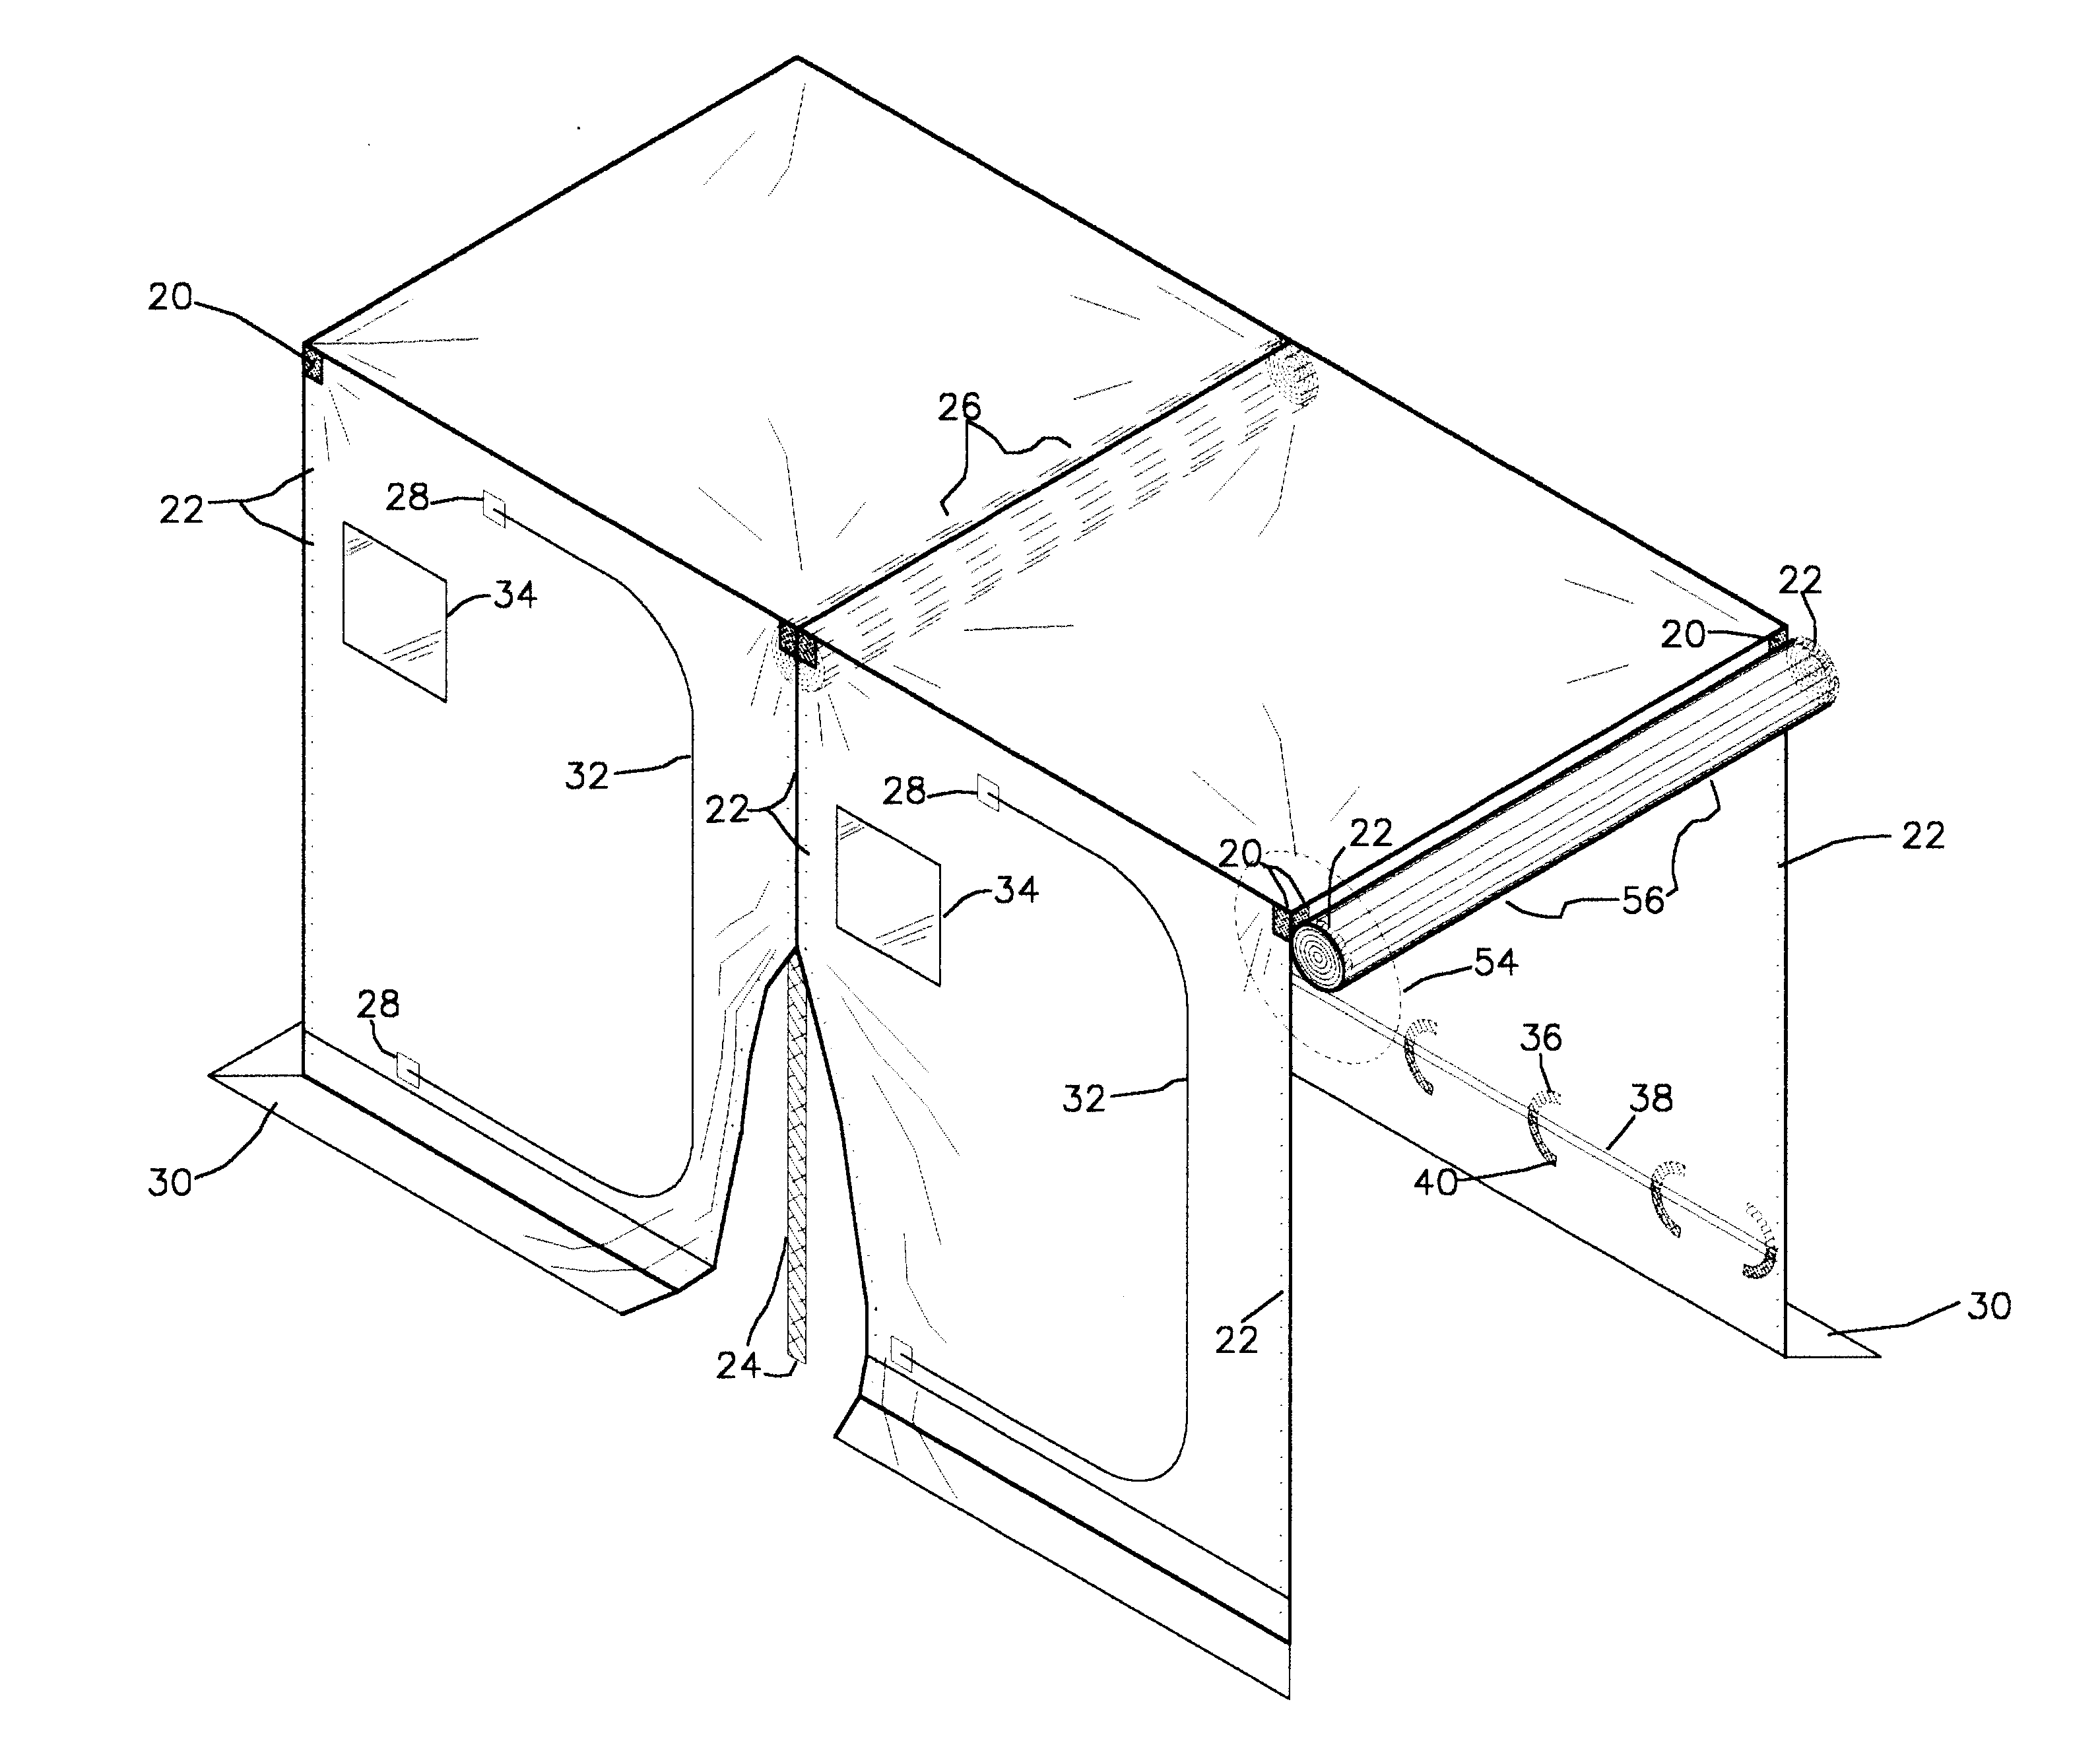 Portable shelter's modular shell including displaceable/connectable walls